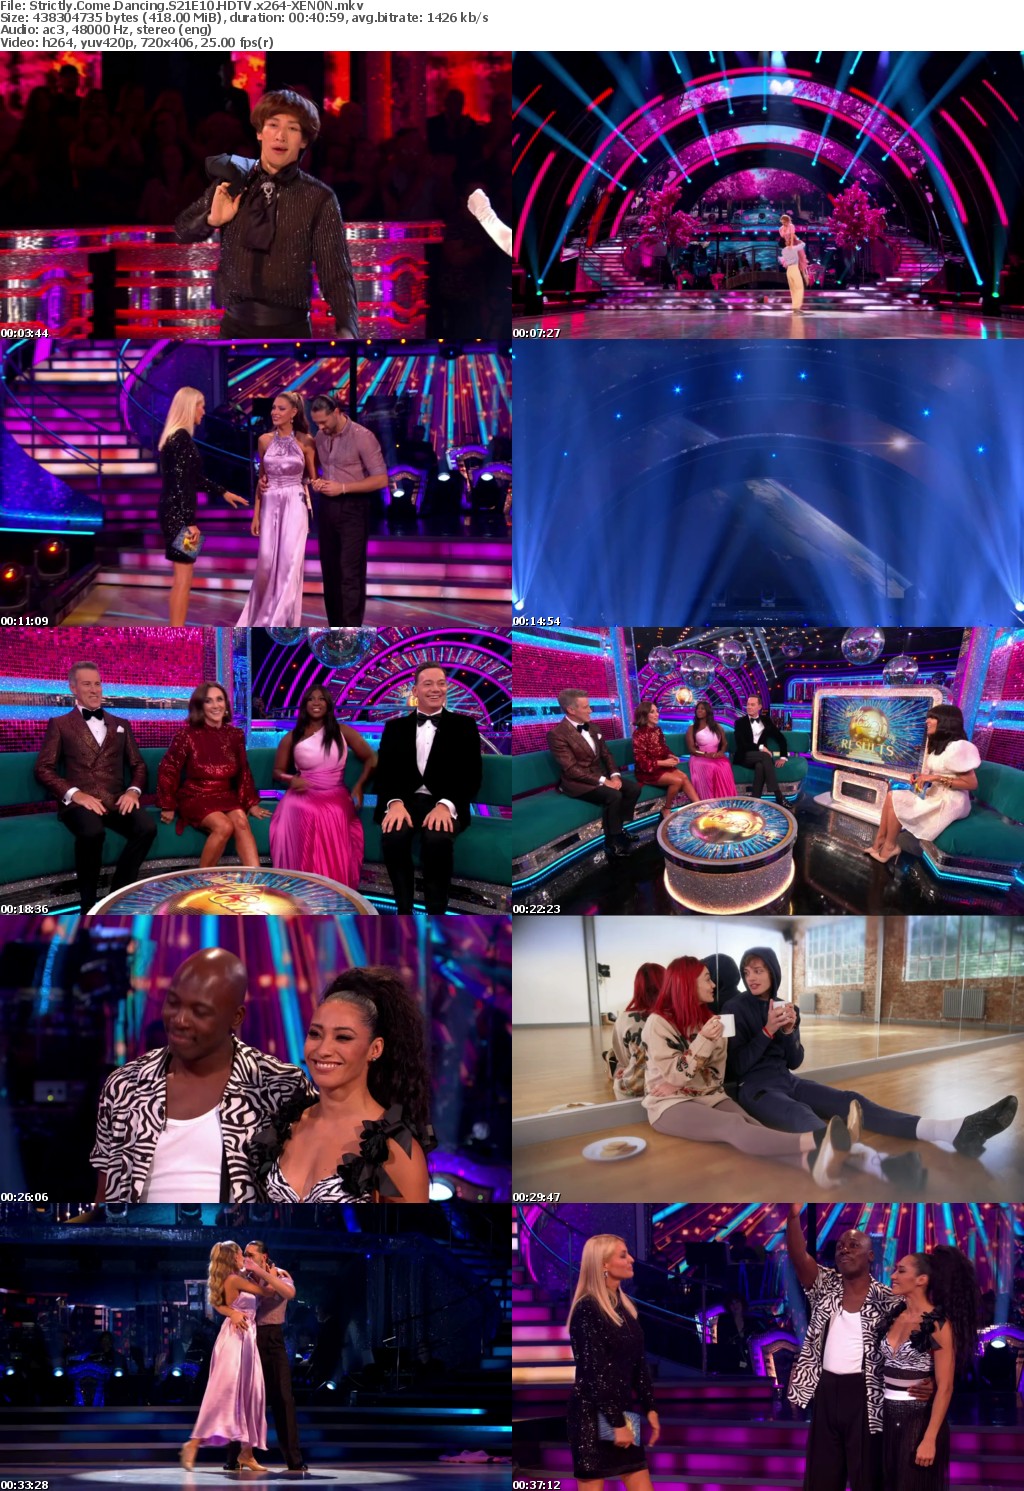 Strictly Come Dancing S21E10 HDTV x264-XEN0N Saturn5